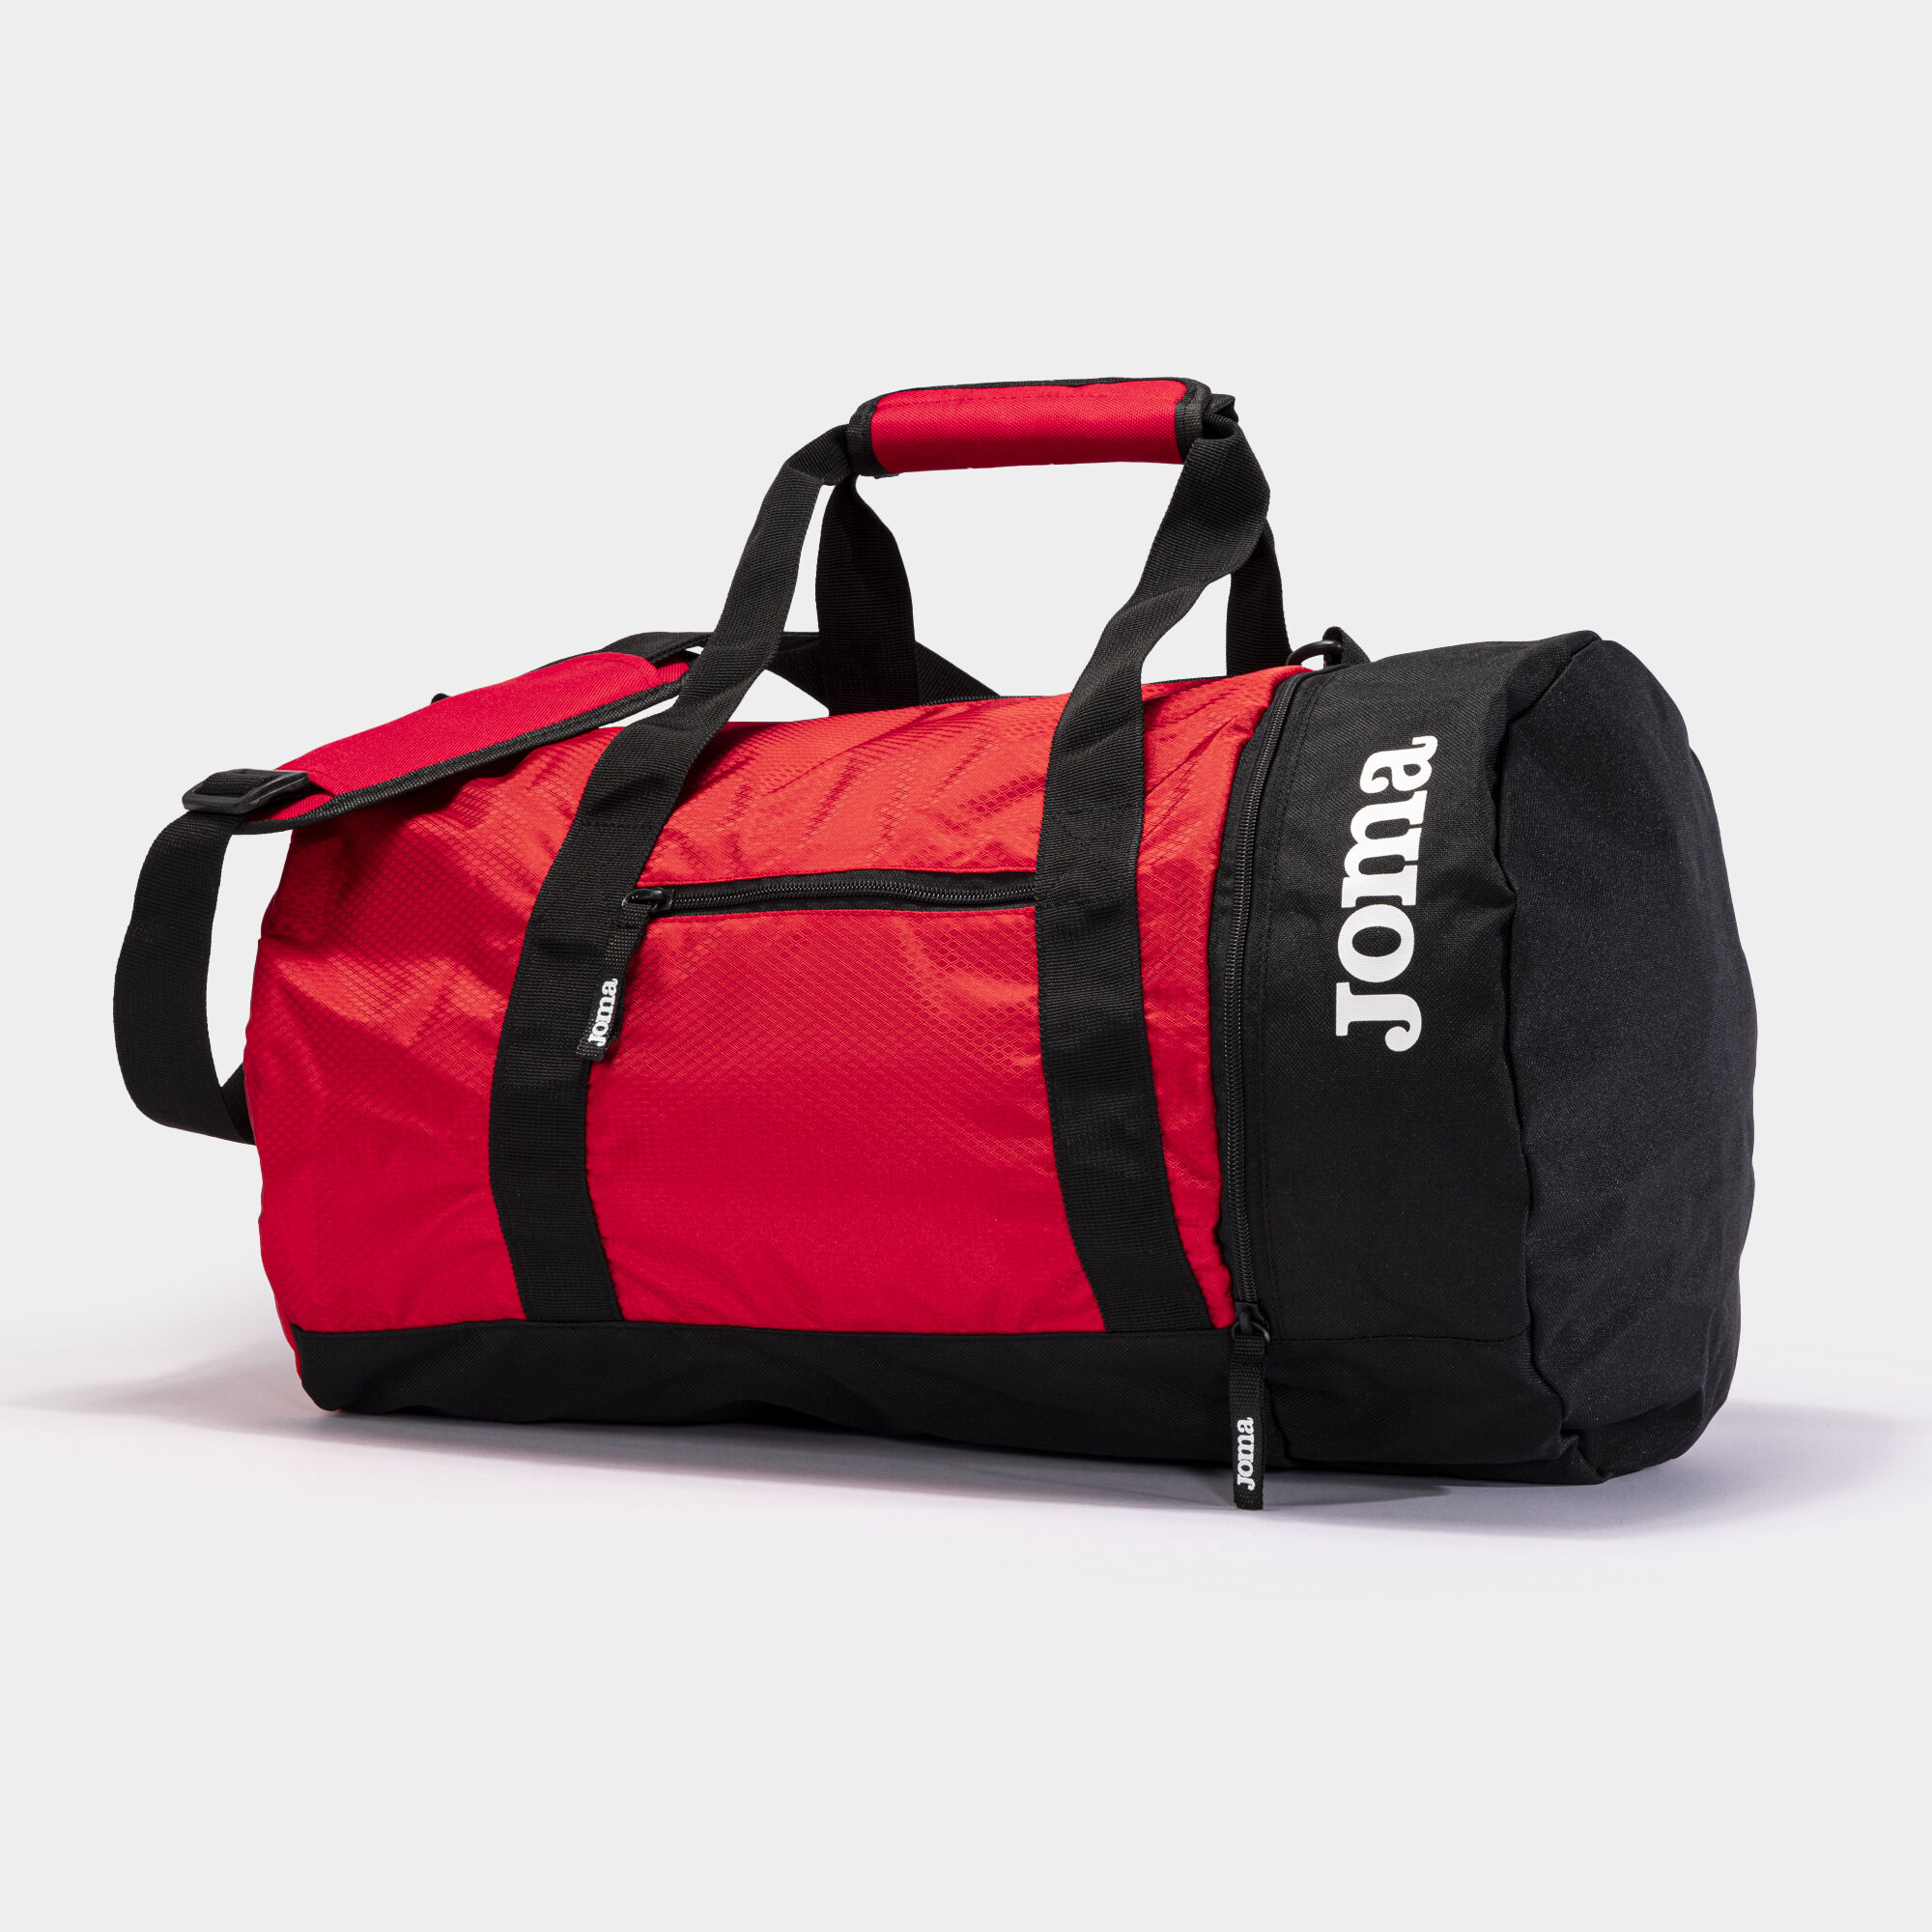 Sports bag red